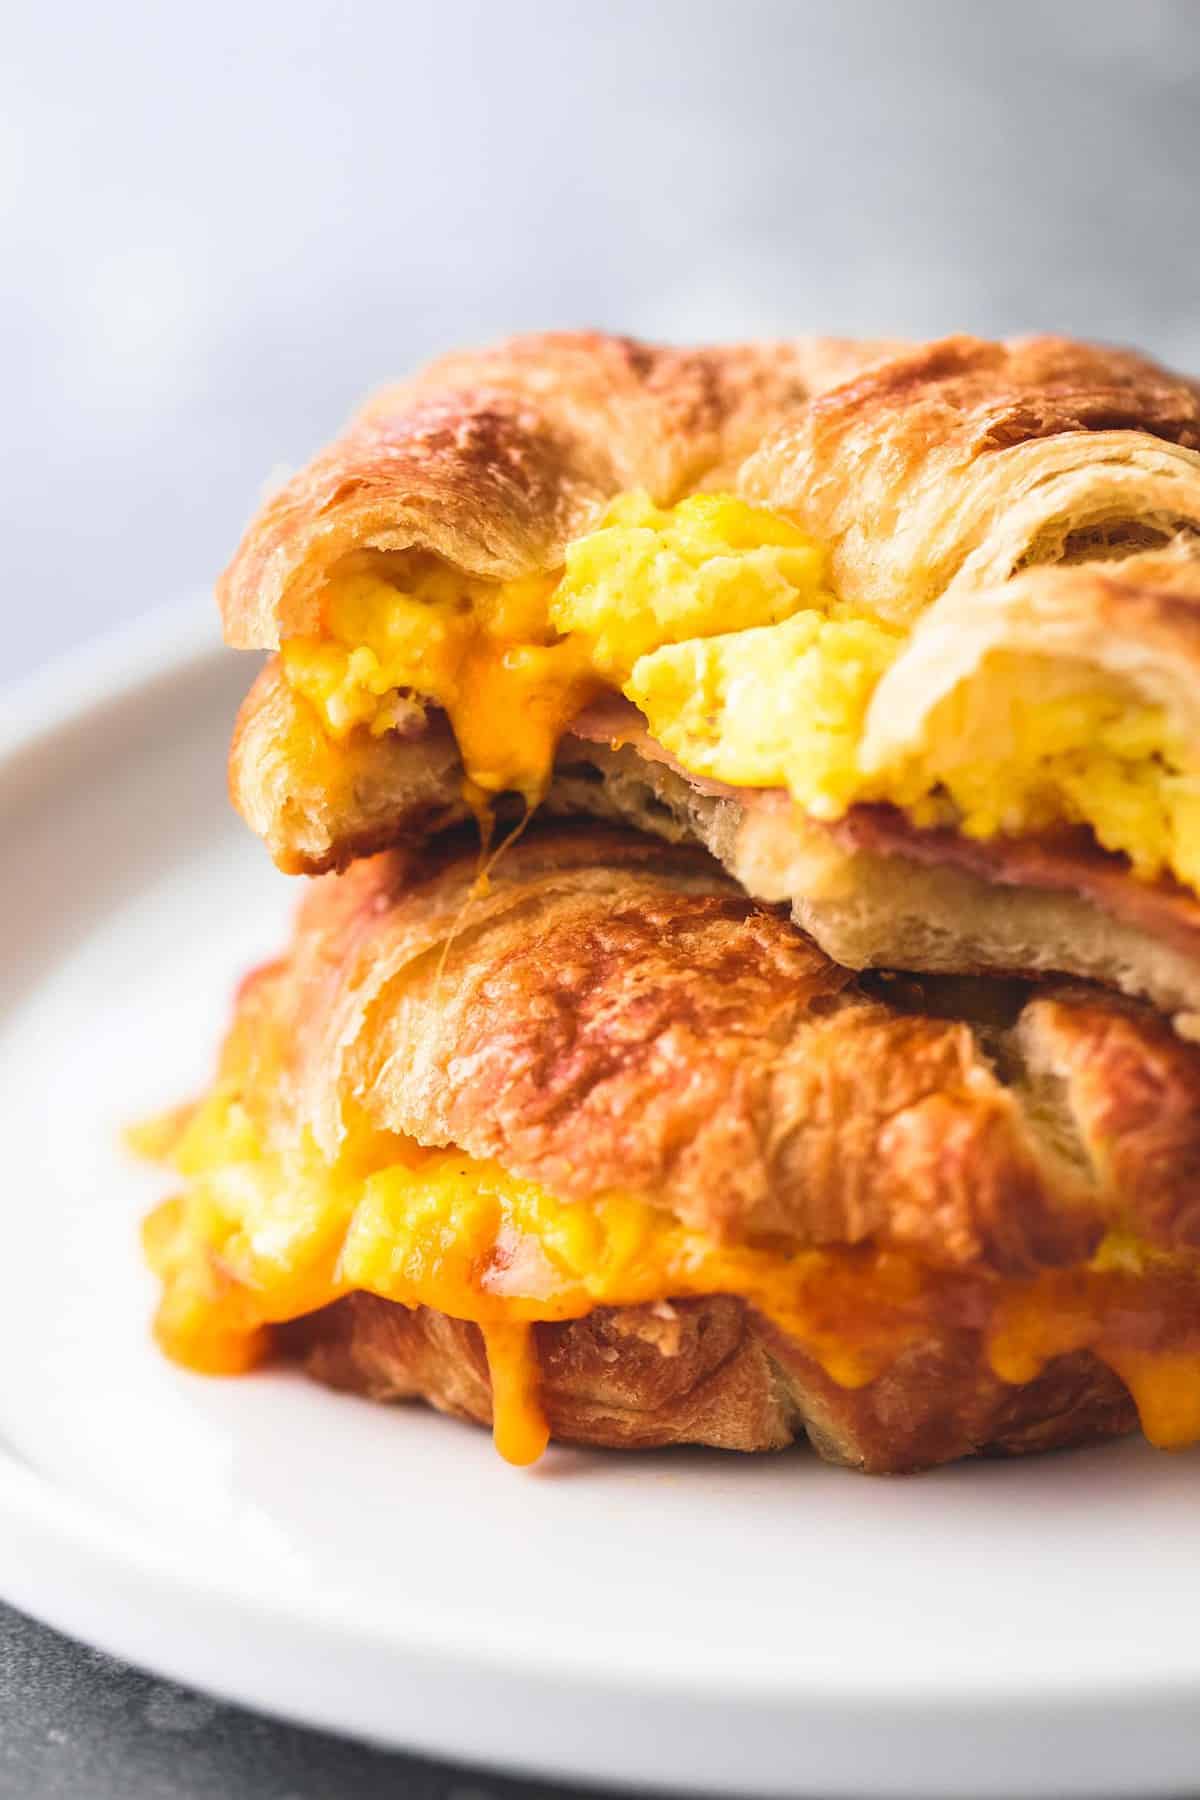 stacked baked croissant breakfast sandwiches on a plate with the top one missing a bite.